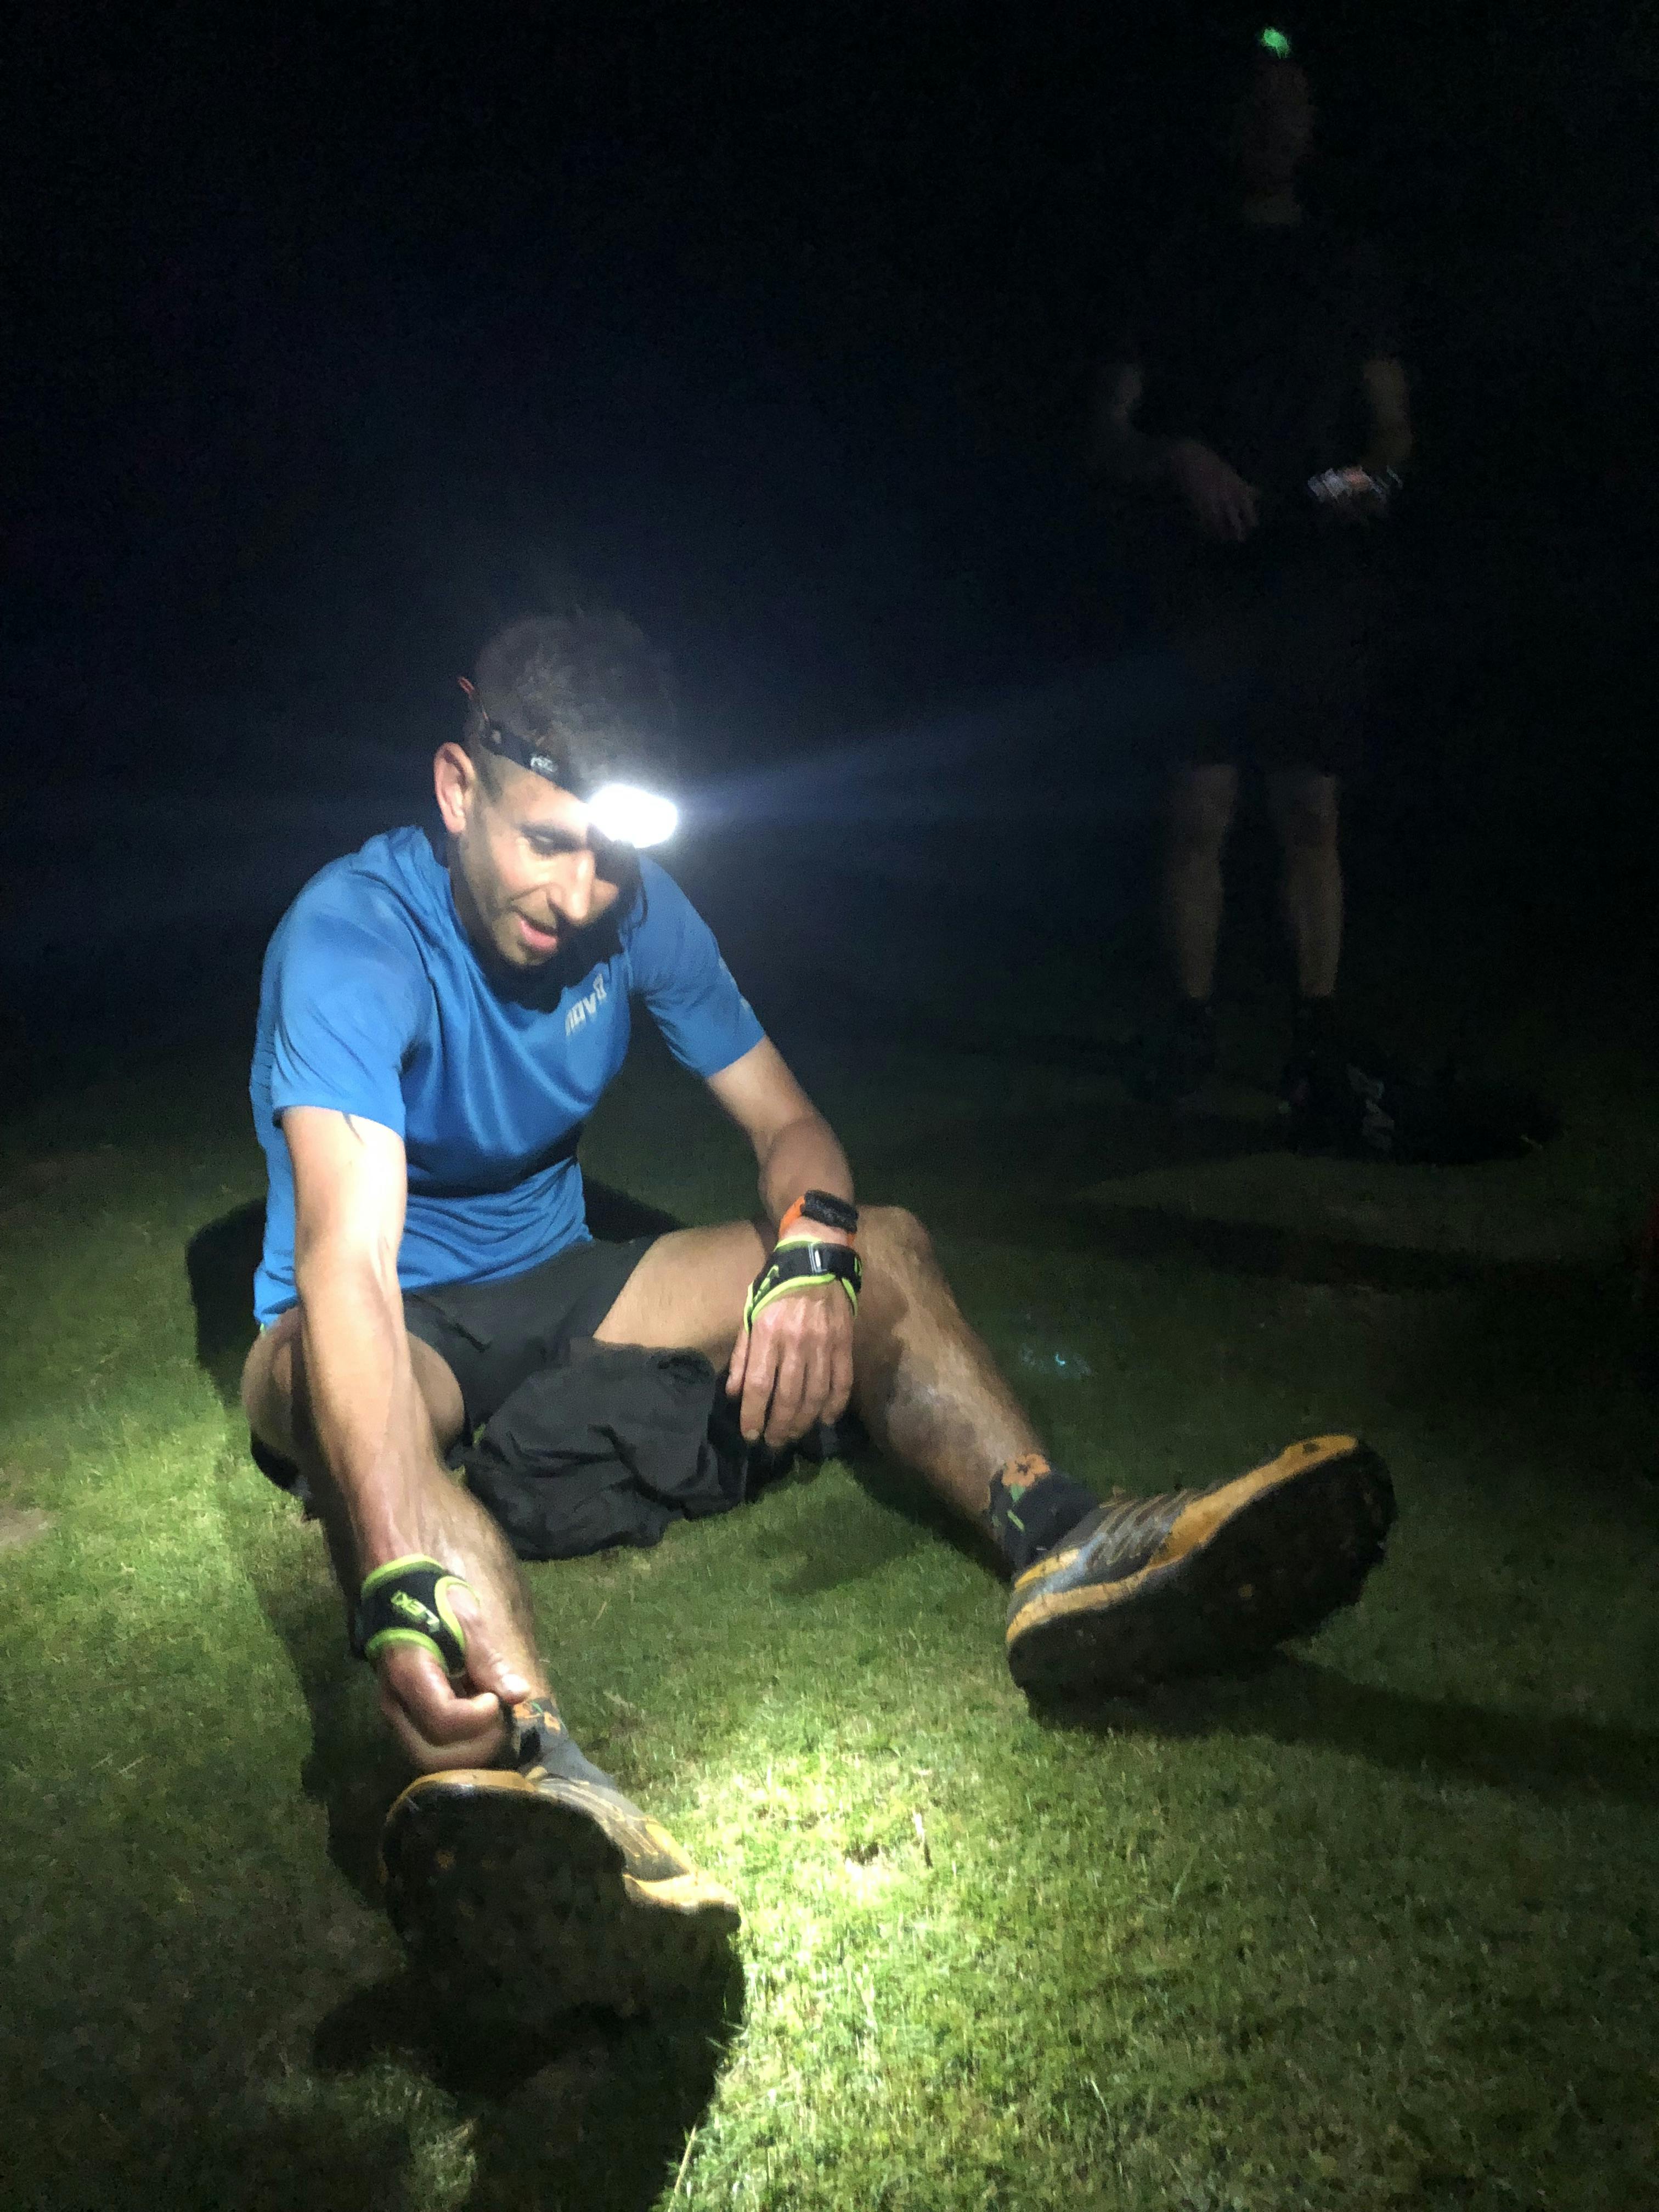 andy-berry-lake-district-24-hour-record-inov8